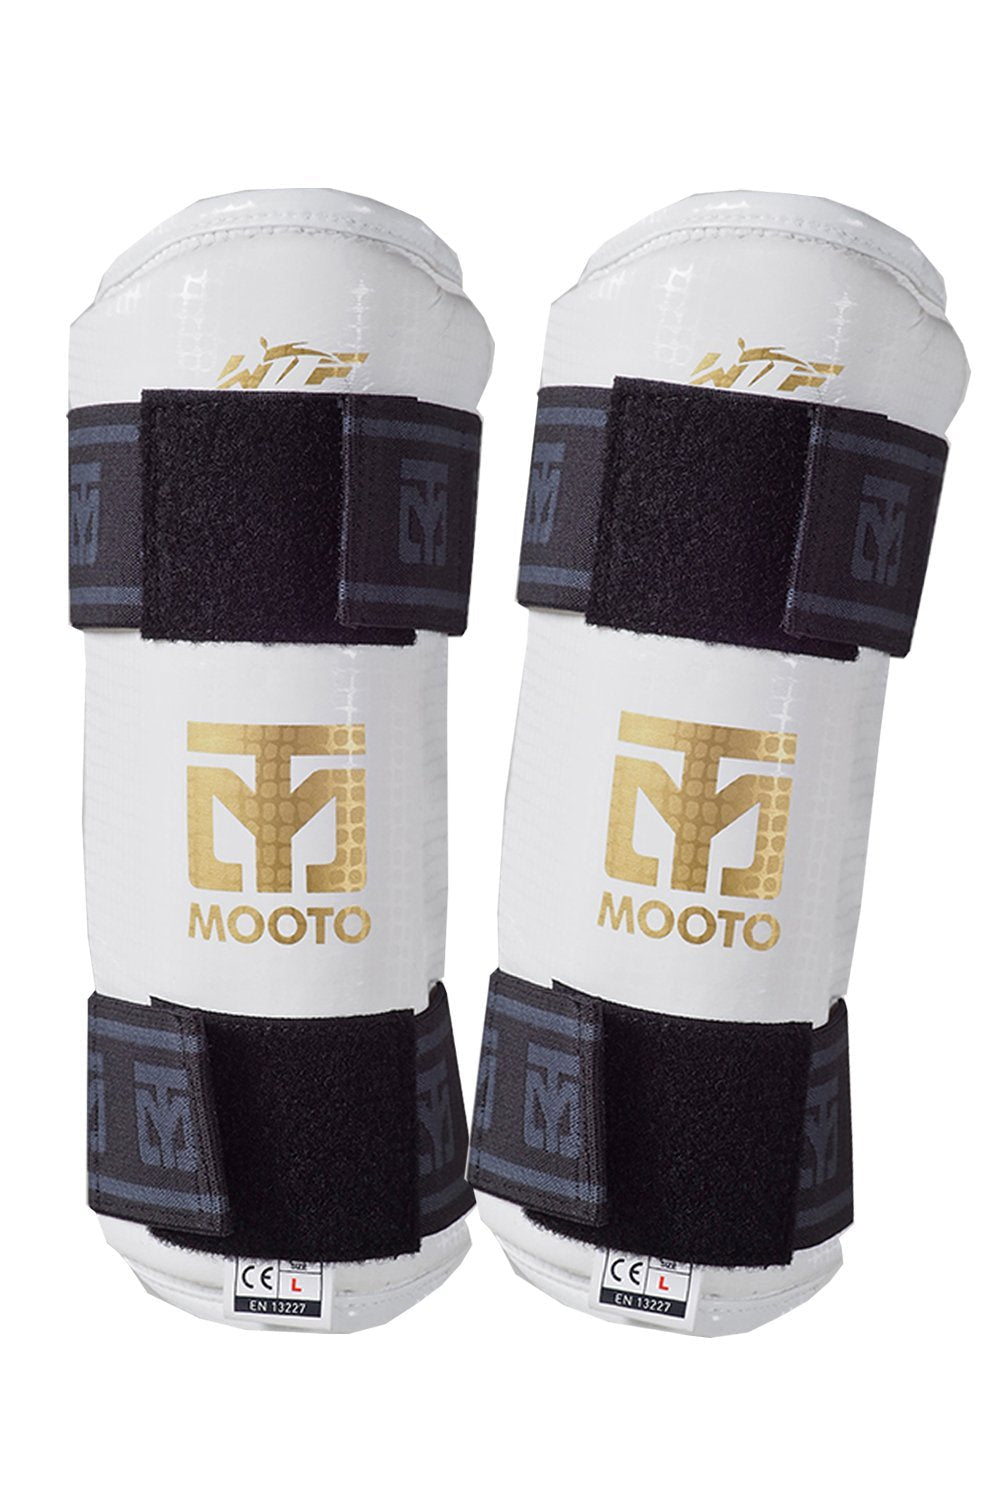 [AUSTRALIA] - Mooto Taekwondo Forearm Protector WTF Approved TKD Guard Black & White XS to XL 5.XL(more than 6.17ft or more than 188cm) 